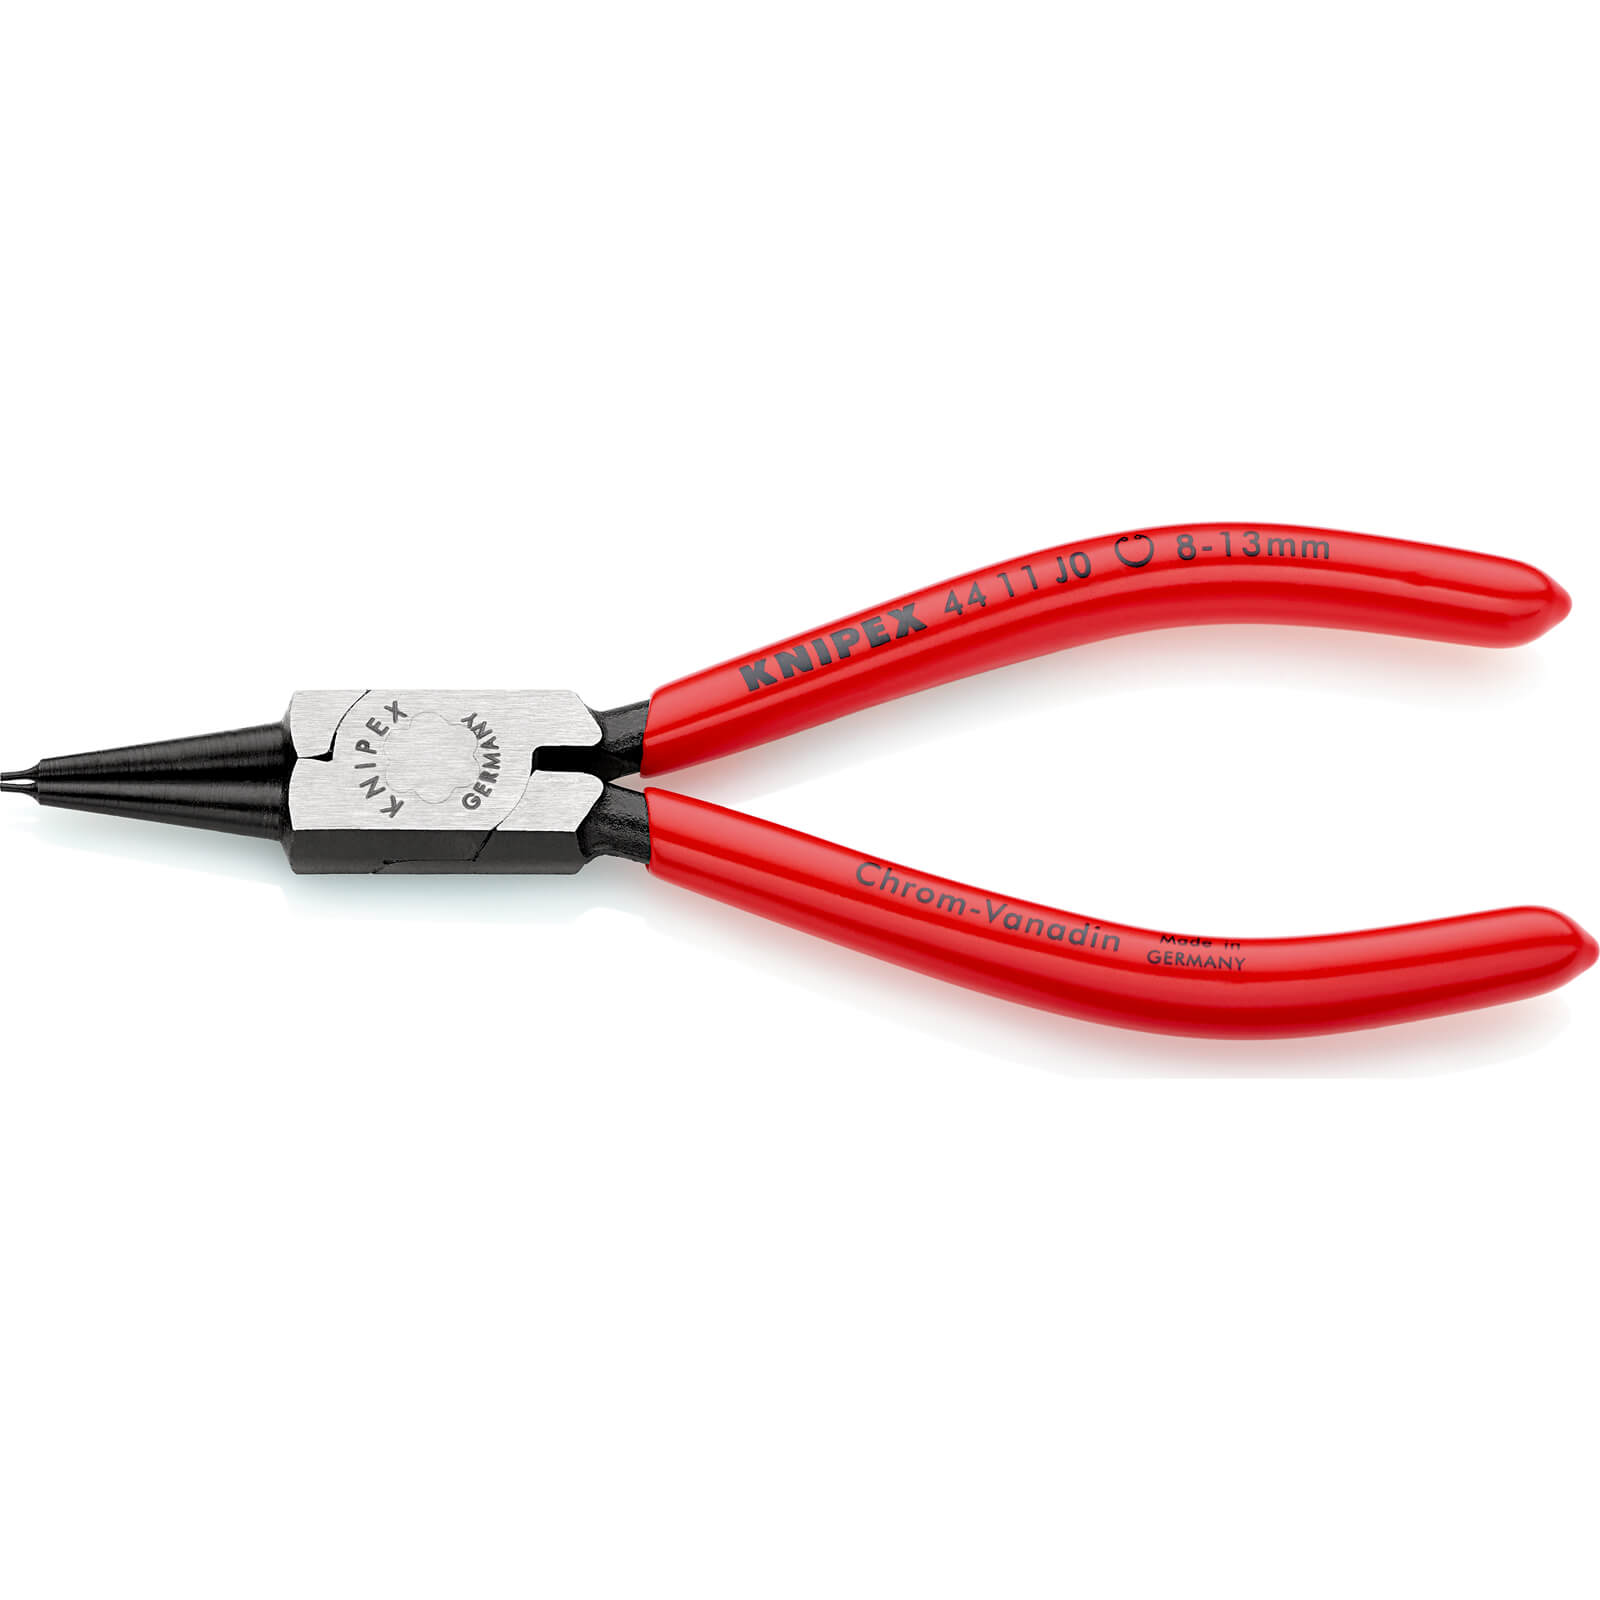 Image of Knipex 44 11 Internal Straight Circlip Pliers 8mm - 13mm